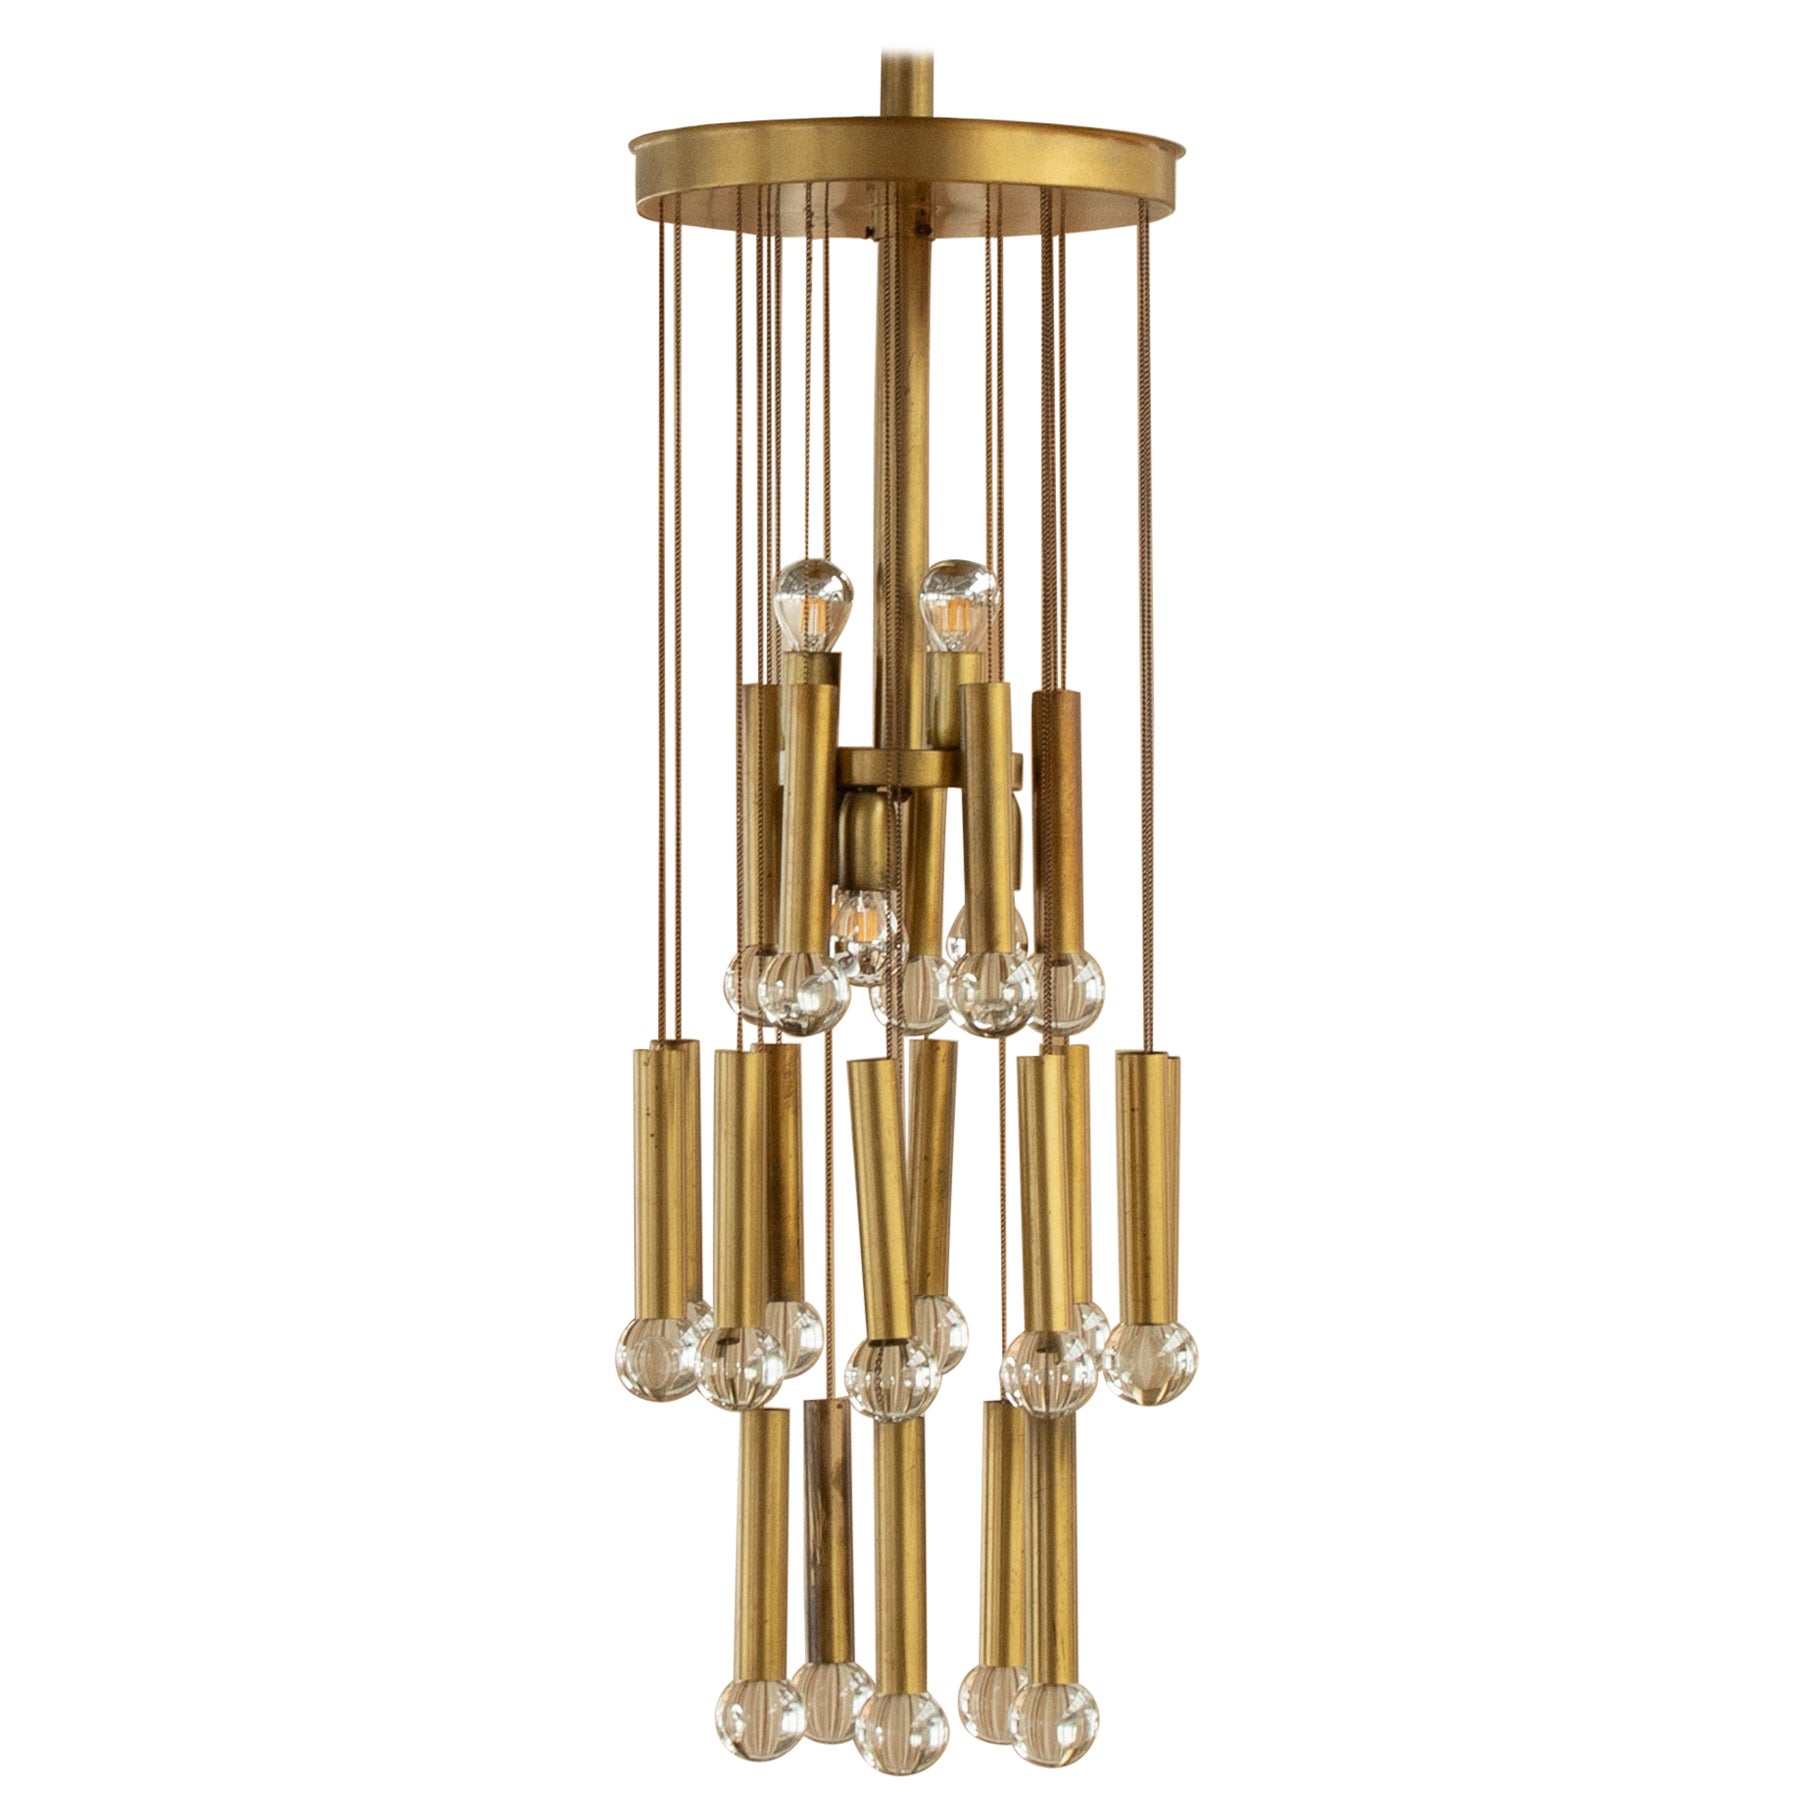 70s gold brass chain chandelier with glass globes For Sale